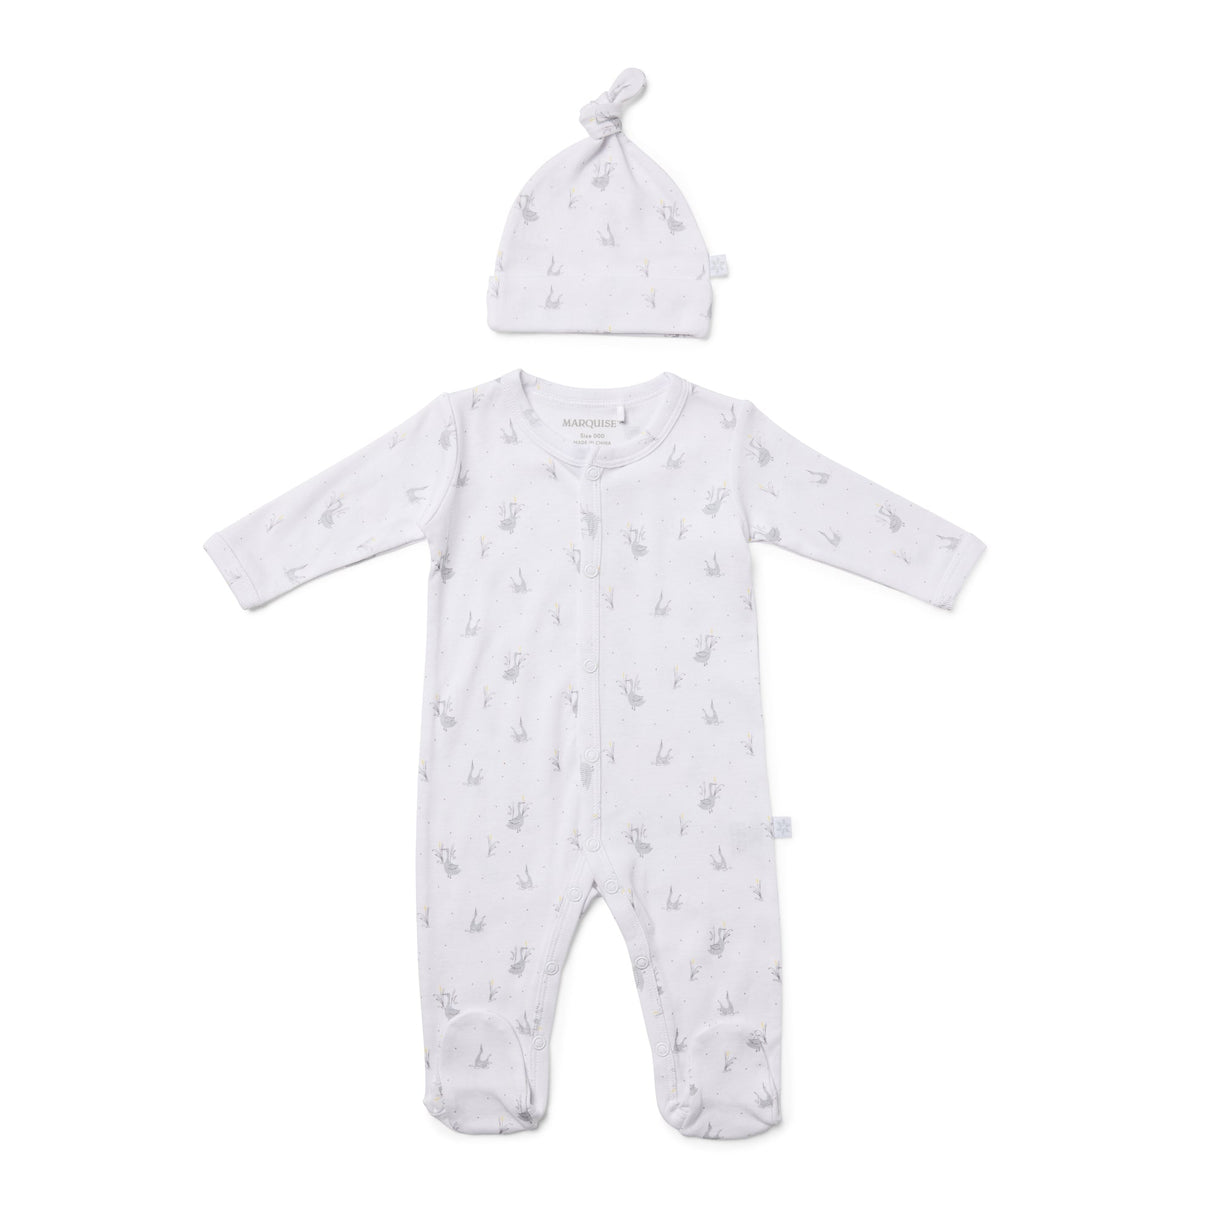 Marquise Duck Studsuit and Beanie 2 Piece Set